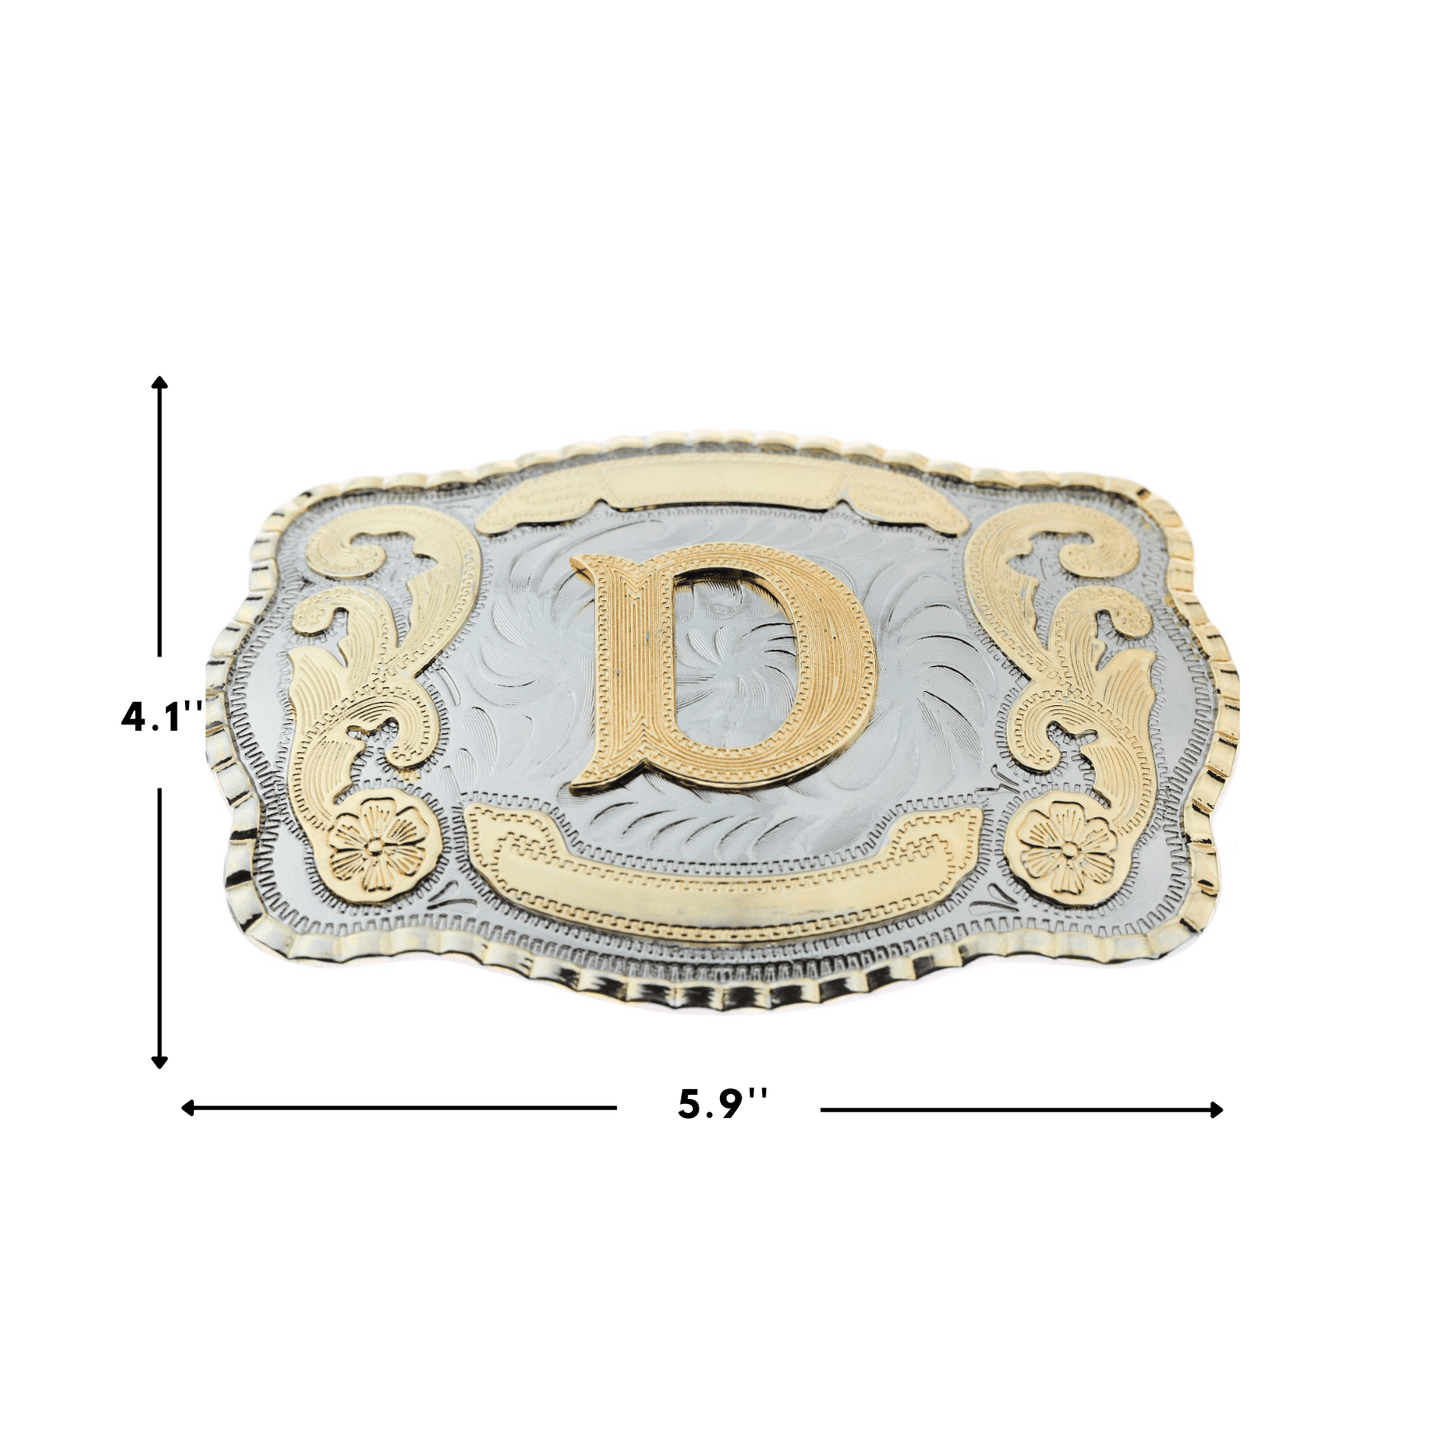 Initial Letter "D" Cowboy Rodeo Western Large Gold Tone Belt Buckle